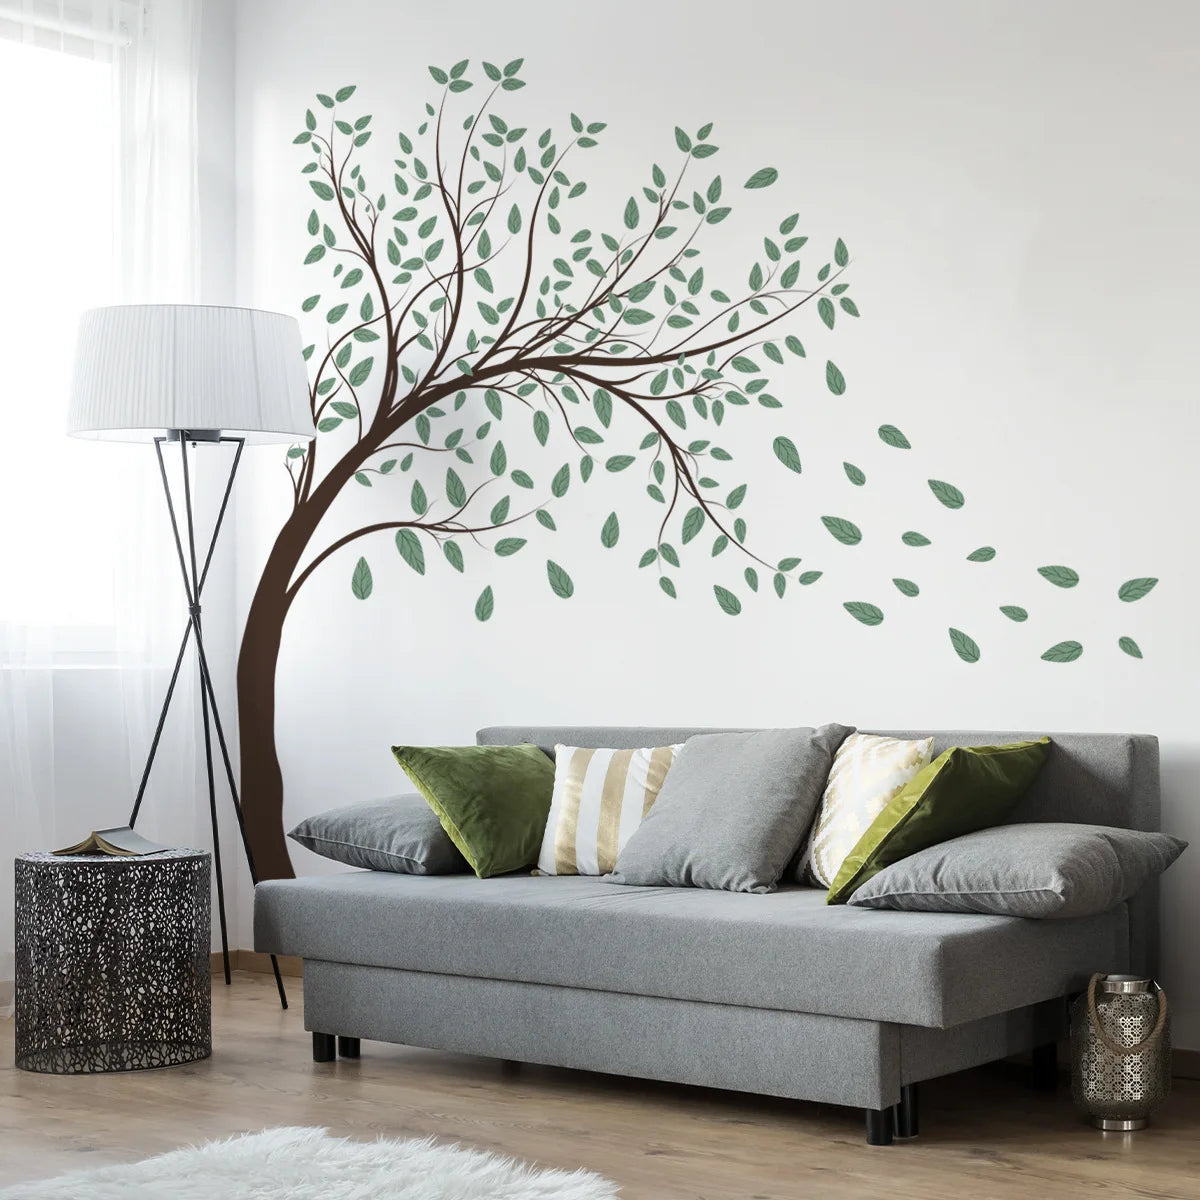 Cute Simple Large-Sized Fresh Green Leaf Tree Wall Stickers Kids Room Living-room Bedroom Home Decoration Decal Poster Wallpaper